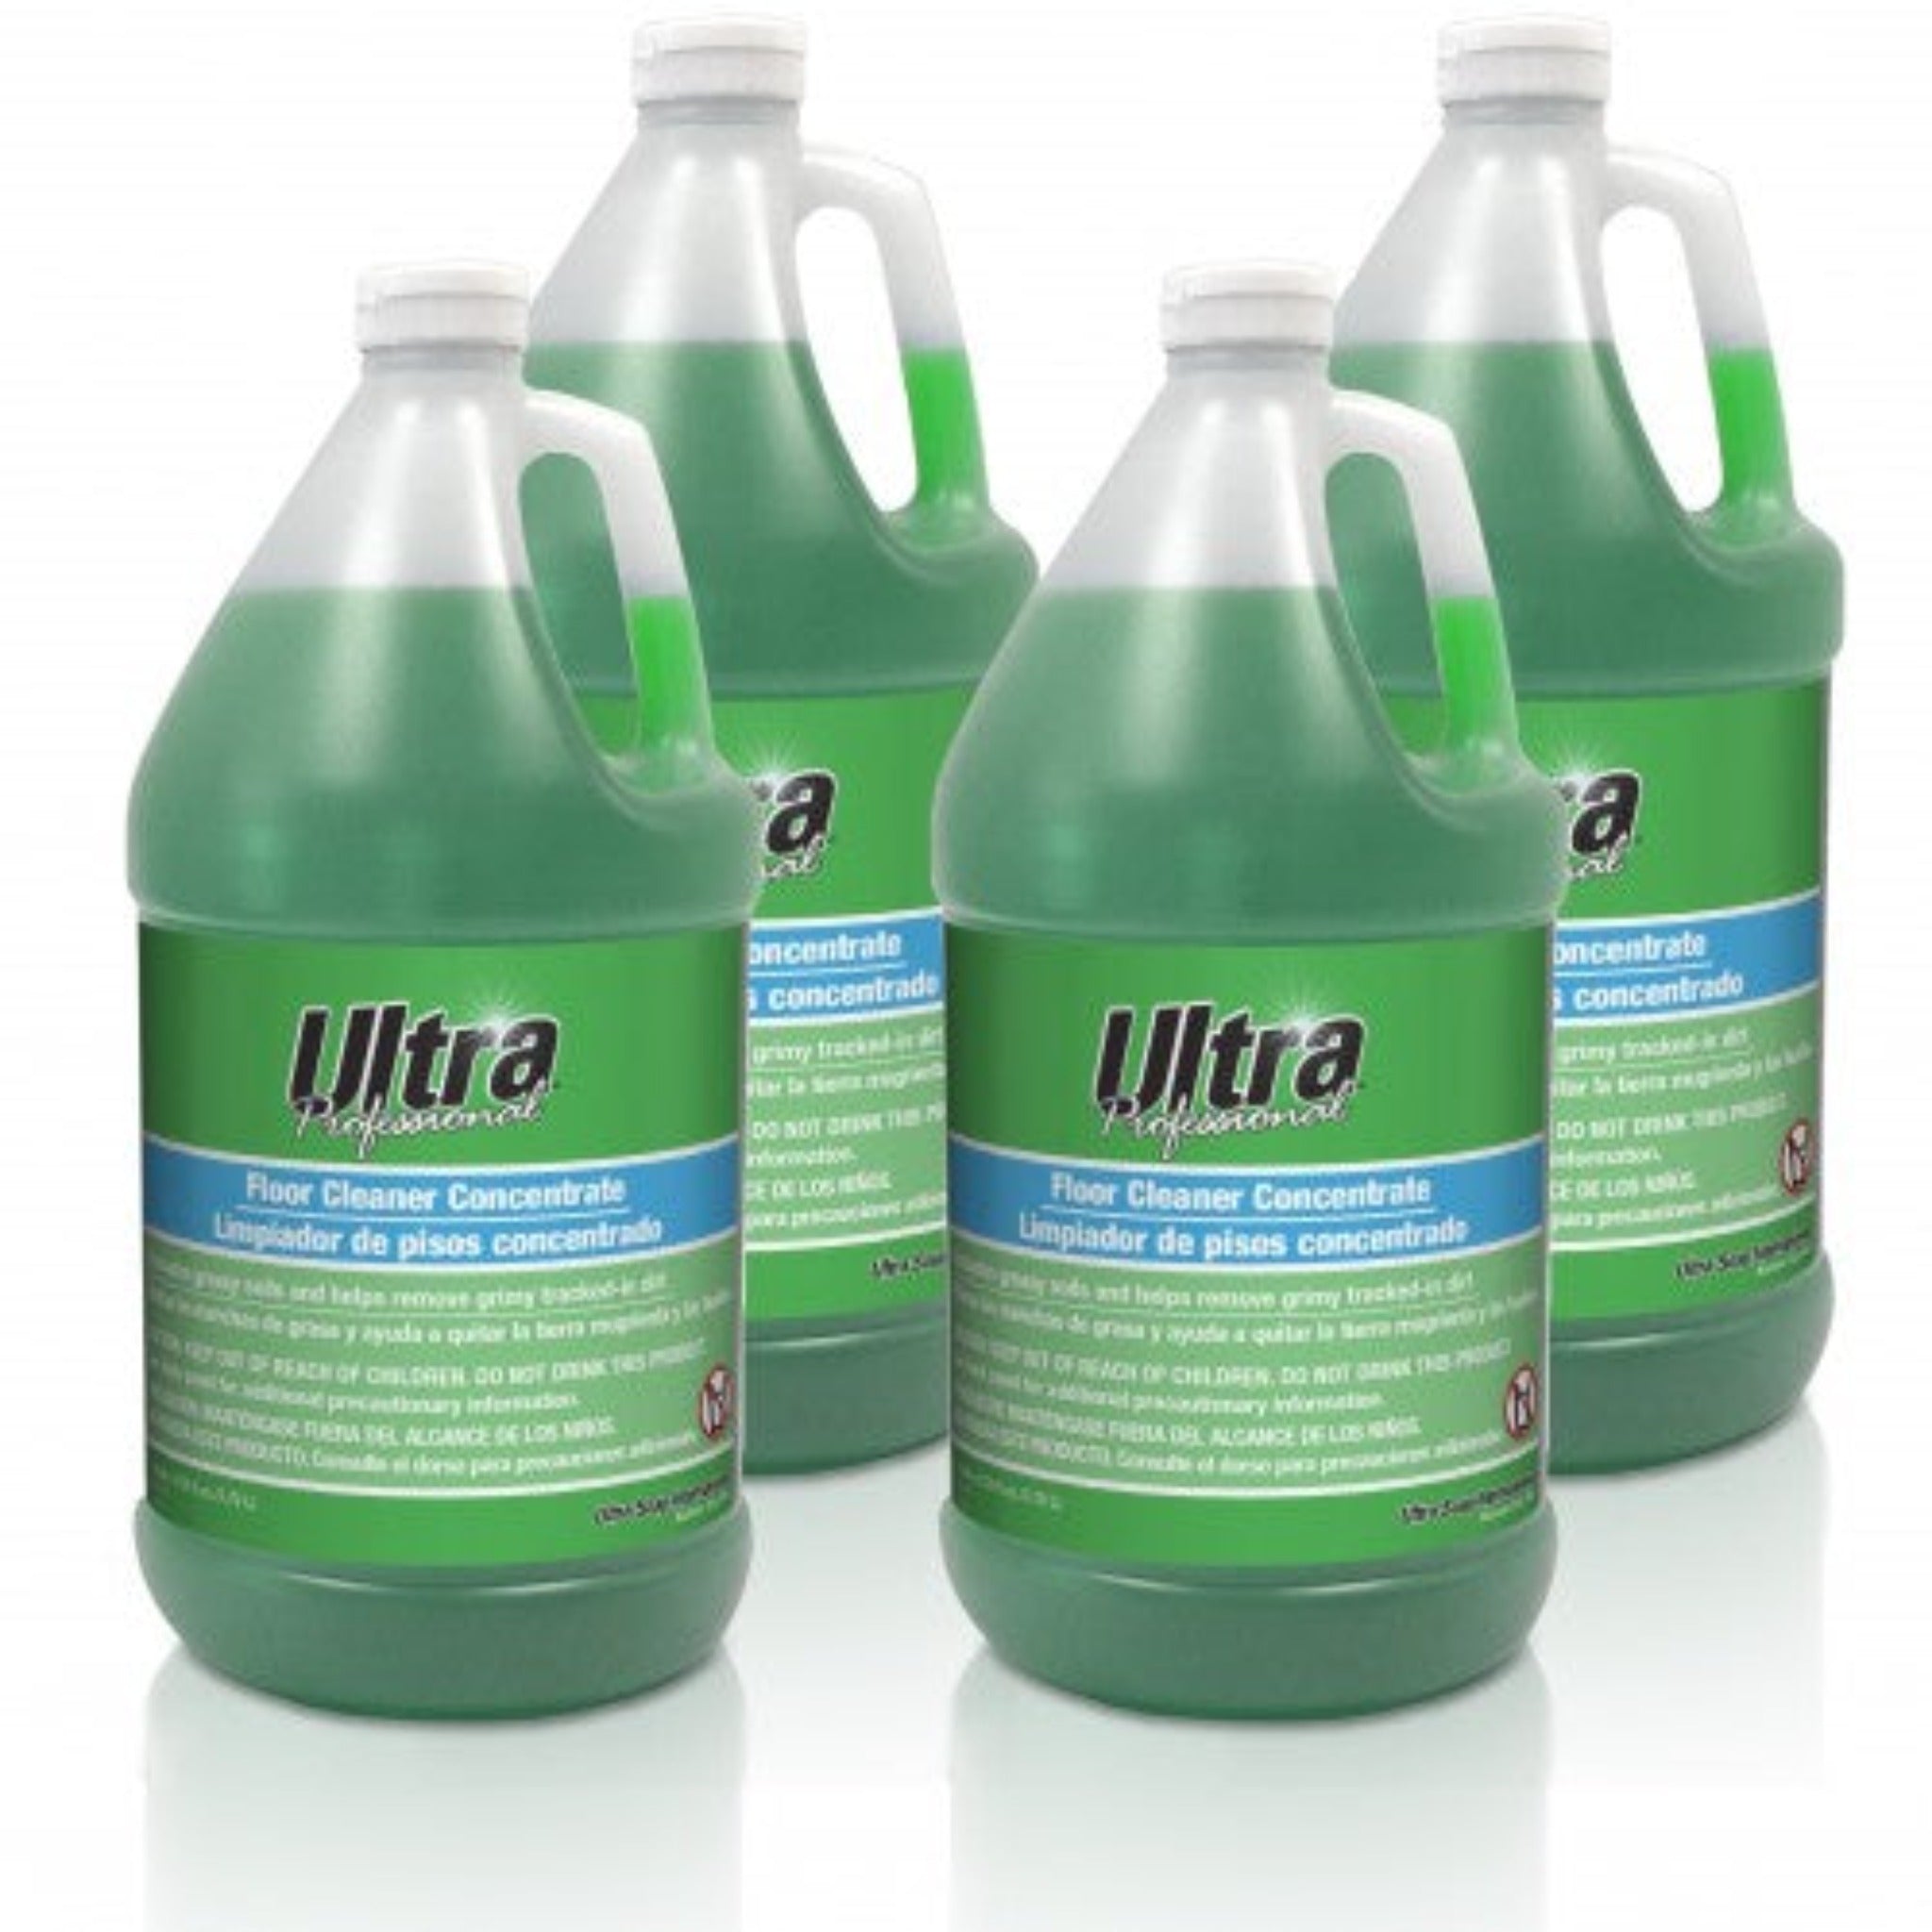 Ultra Professional Floor Cleaner Concentrate - 4x1 Gallon